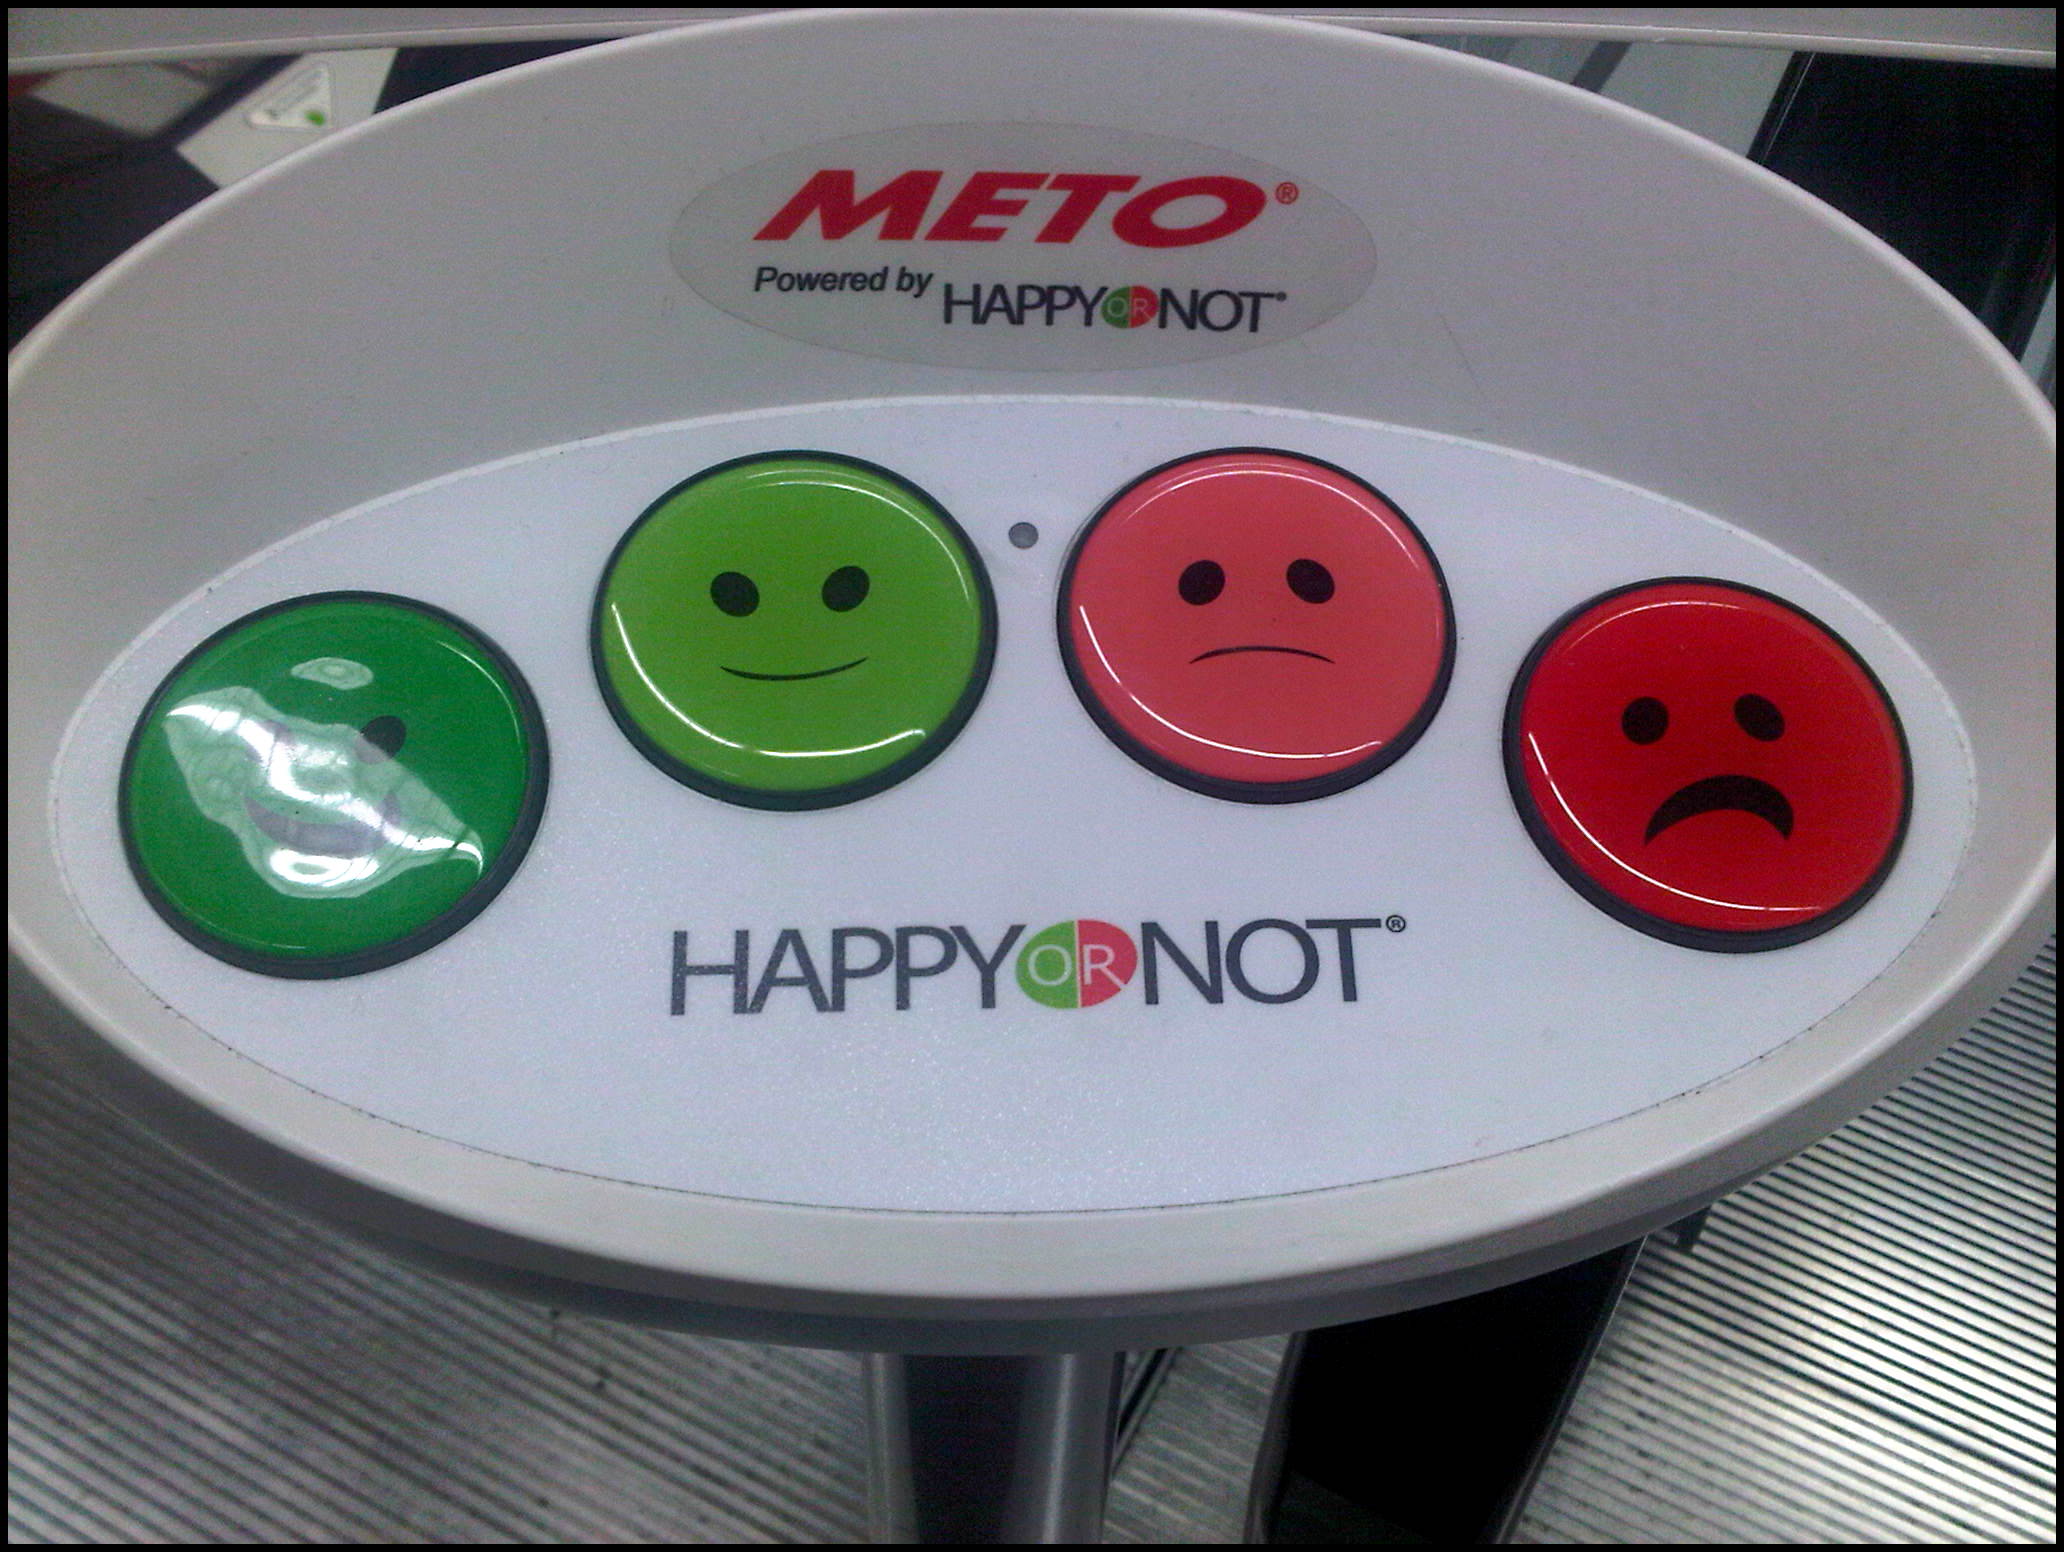 HAPPY or NOT